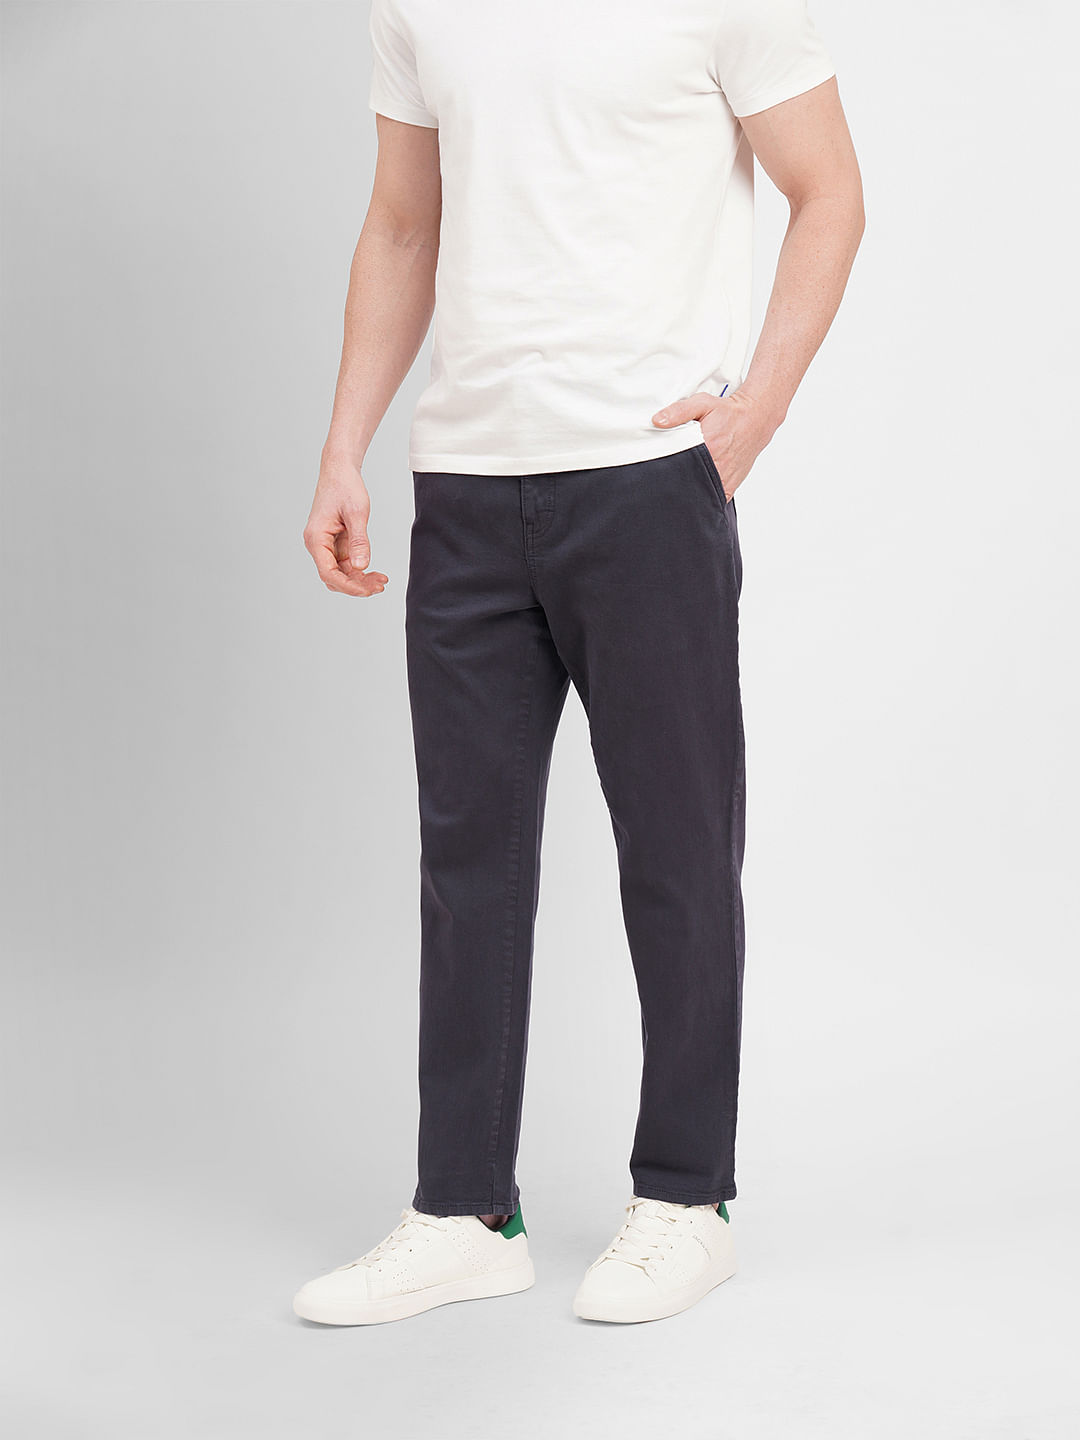 Mens Low Rise Trousers - Buy Mens Low Rise Trousers online in India